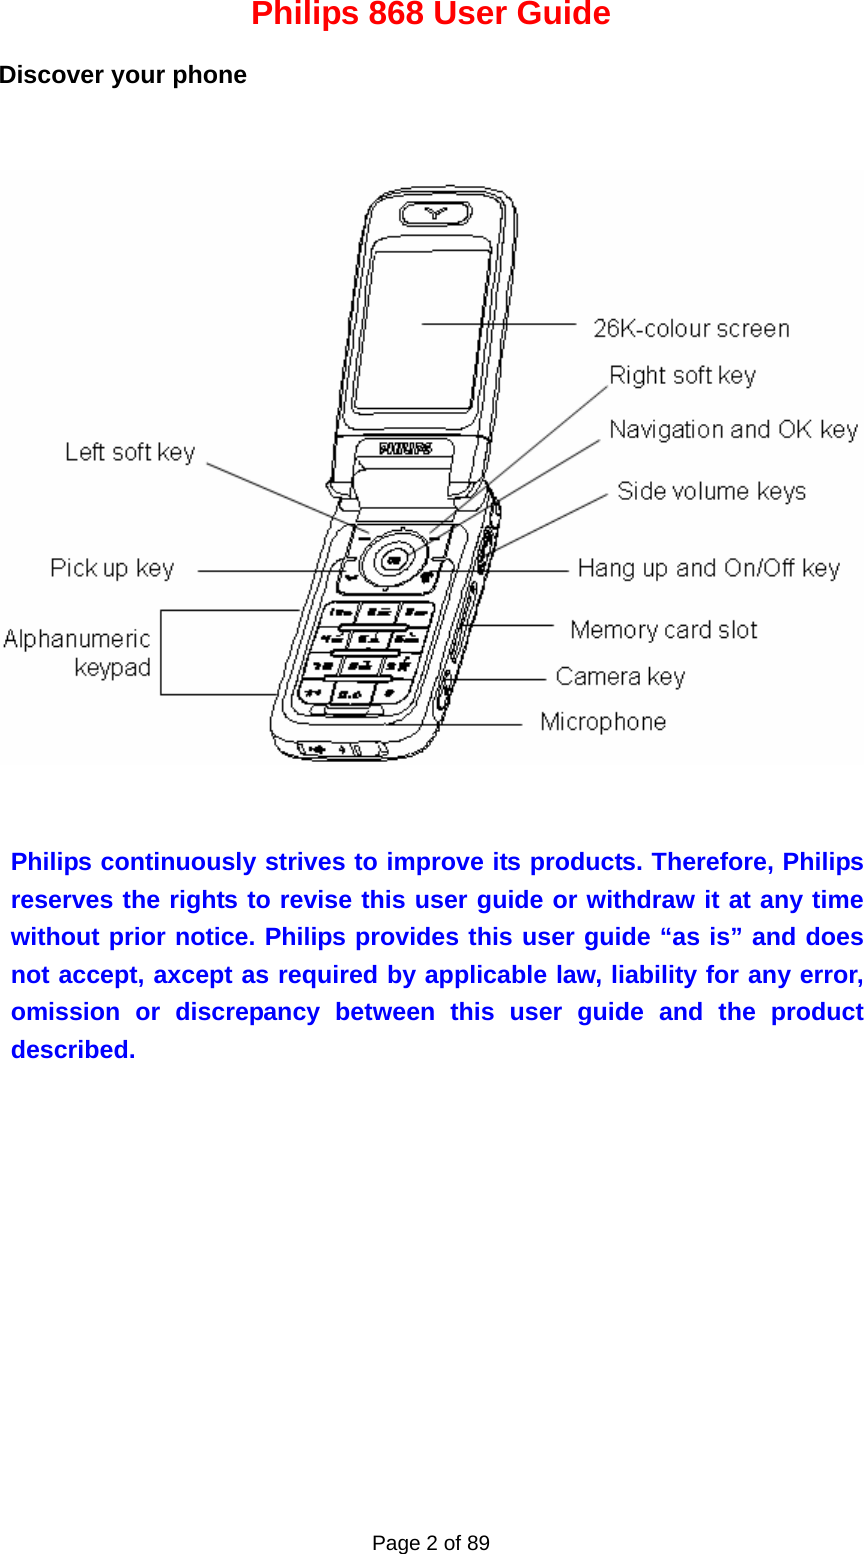 Philips 868 User Guide Page 2 of 89 Discover your phone      Philips continuously strives to improve its products. Therefore, Philips reserves the rights to revise this user guide or withdraw it at any time without prior notice. Philips provides this user guide “as is” and does not accept, axcept as required by applicable law, liability for any error, omission or discrepancy between this user guide and the product described.       